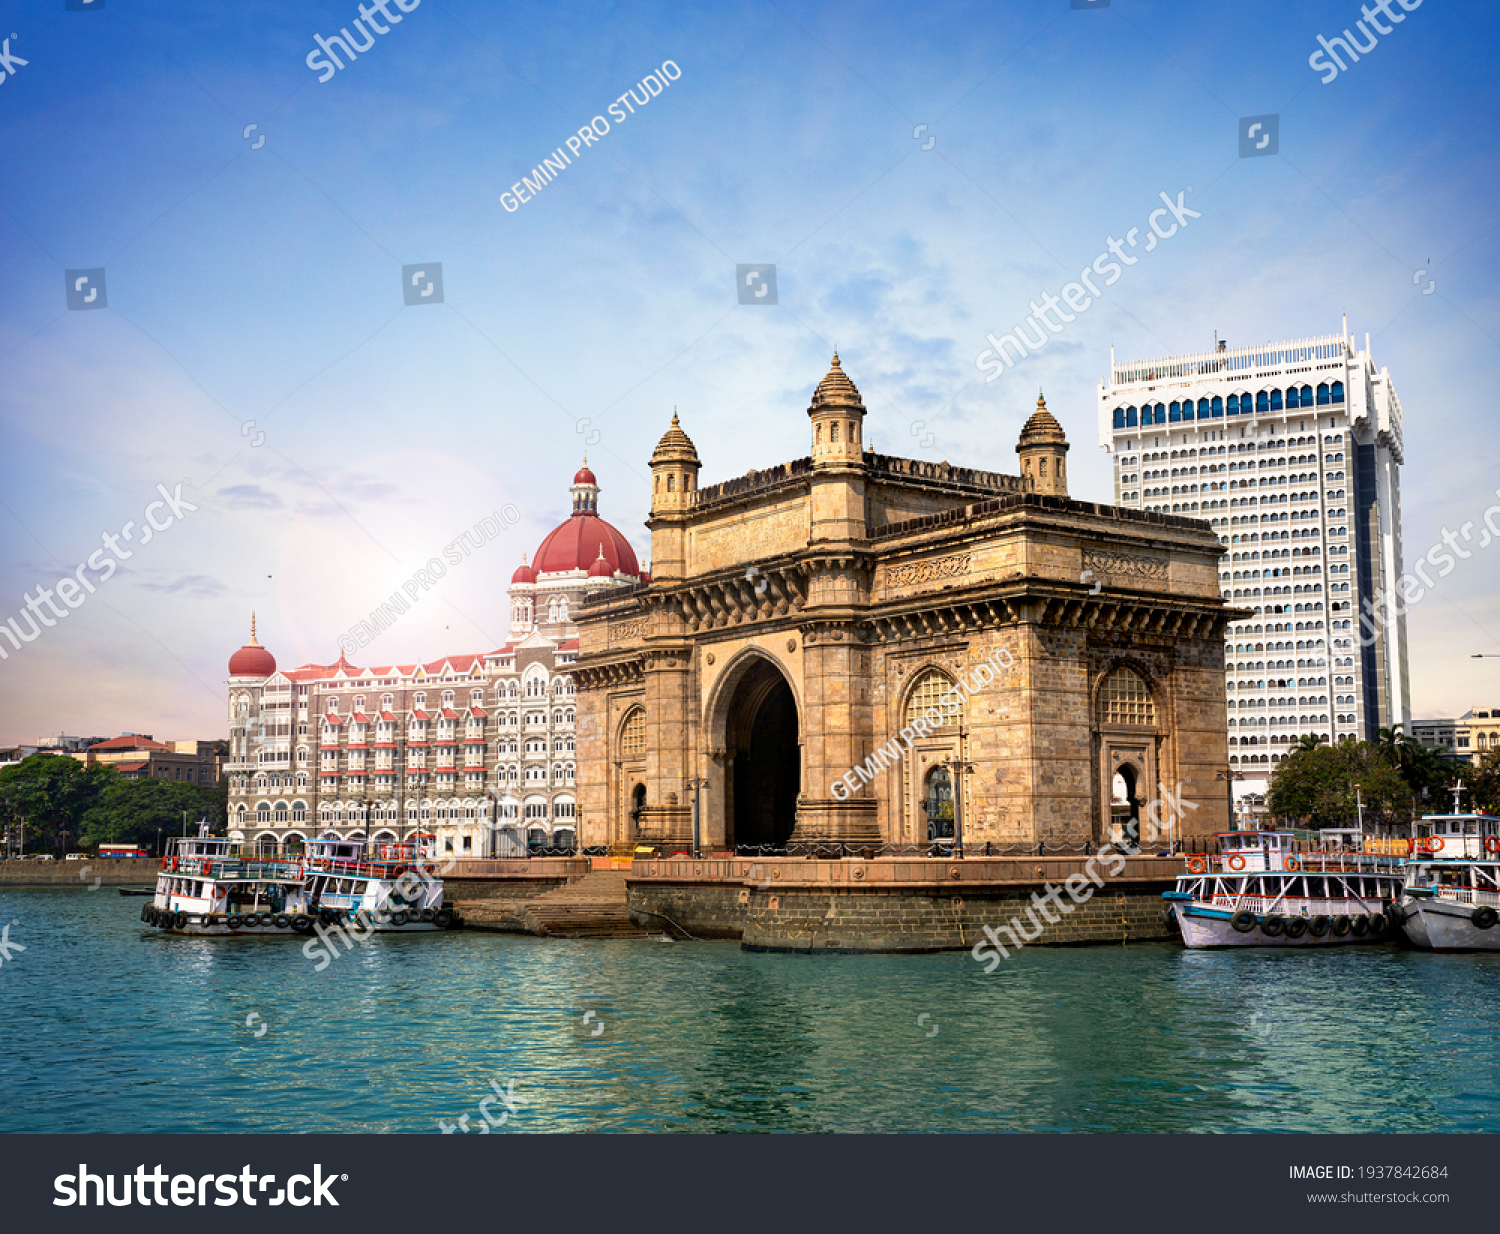 Gateway of India, famous hotel Mumbai Maharashtra monument landmark famous place  magnificent view without people with copy space for advertising Mumbai city #1937842684